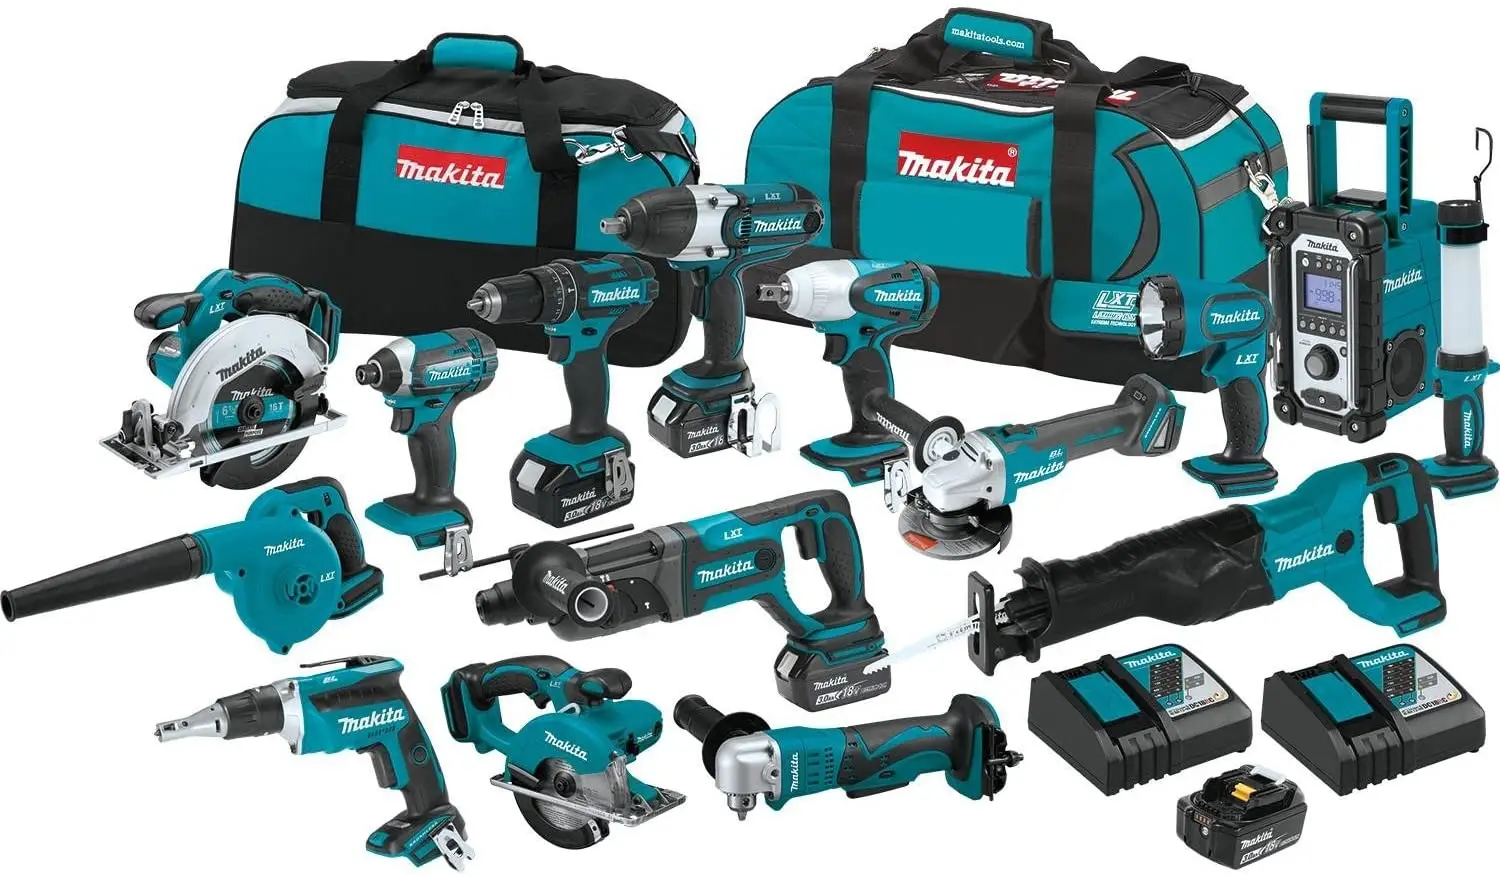 

100% Best Quality Buy 2 Get 1 Free Makitas LXT1500 18-Volt LXT Lithium-Ion Cordless 15-Piece Combo Kit / power tool / cordless d